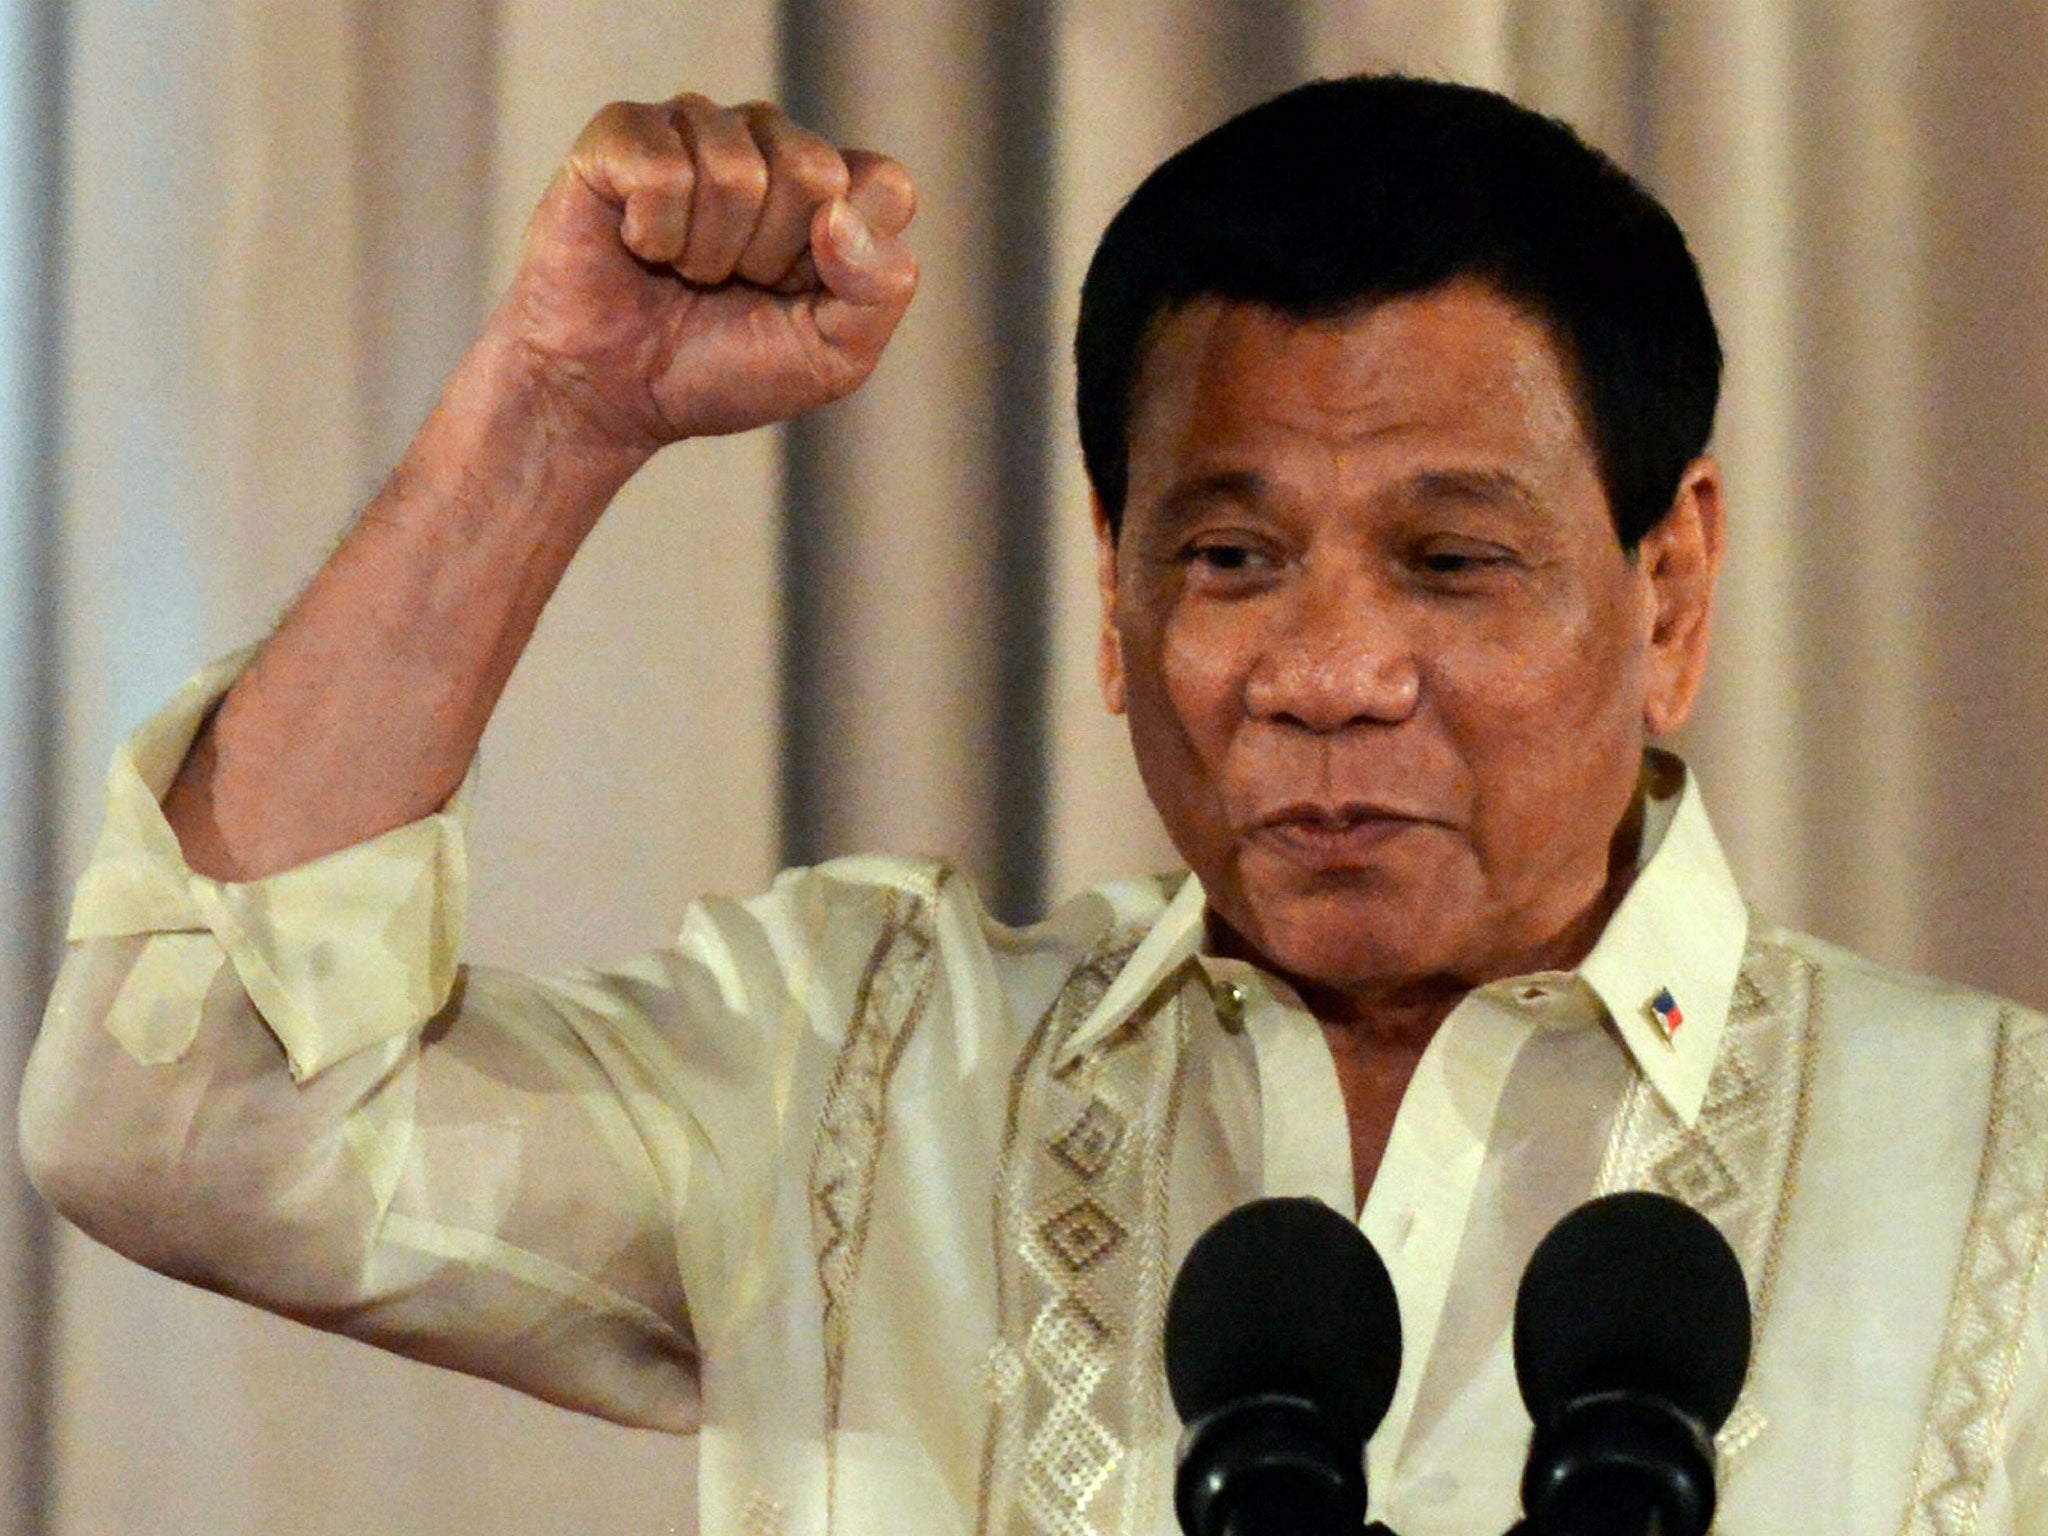 Philippine President Rodrigo Duterte gestures while speaking during the oathtaking ceremony for newly appointed generals of the Armed Forces of the Philippines at the presidential palace in Manila on 31 January, 2017